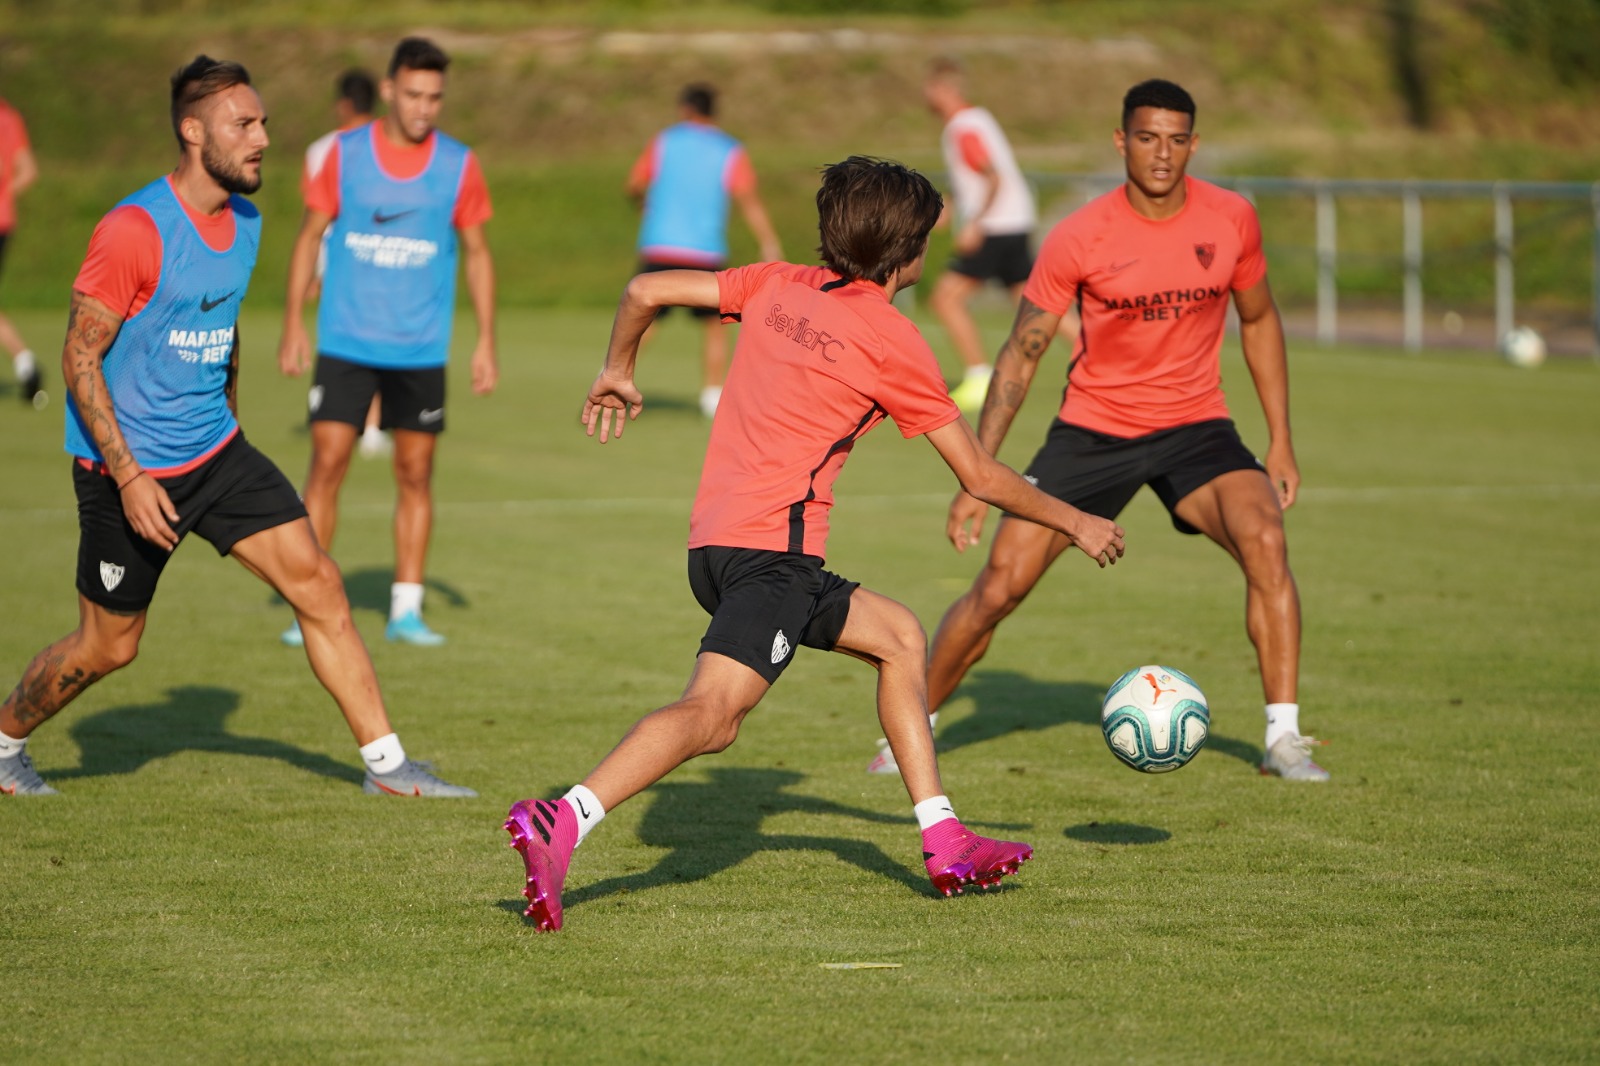 Bryan drives with the ball in training